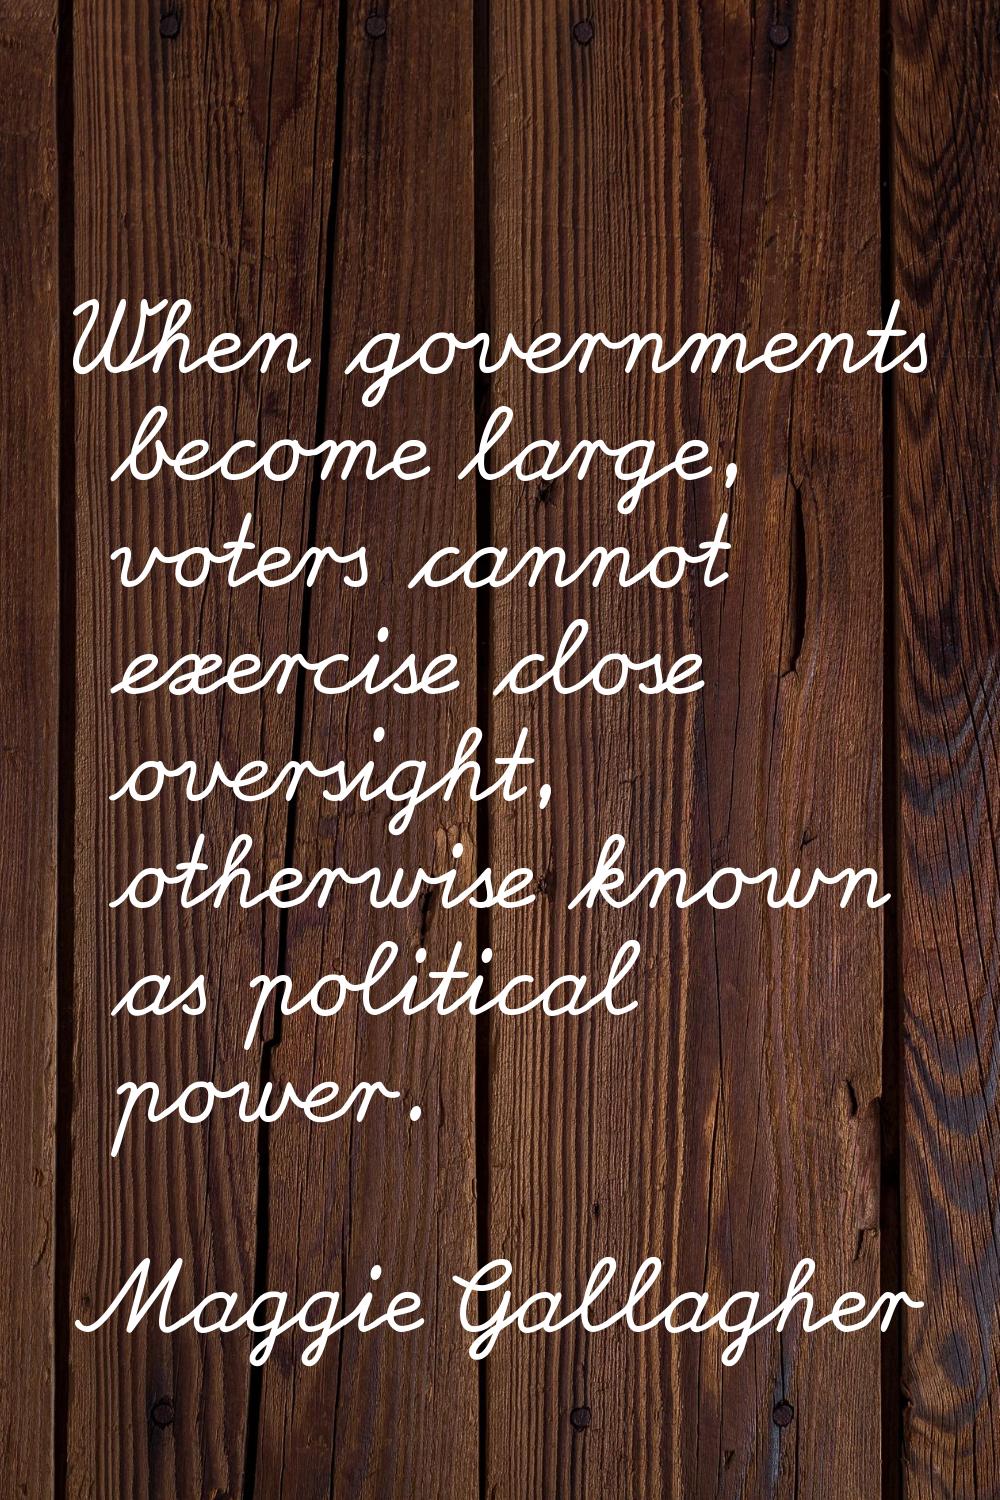 When governments become large, voters cannot exercise close oversight, otherwise known as political